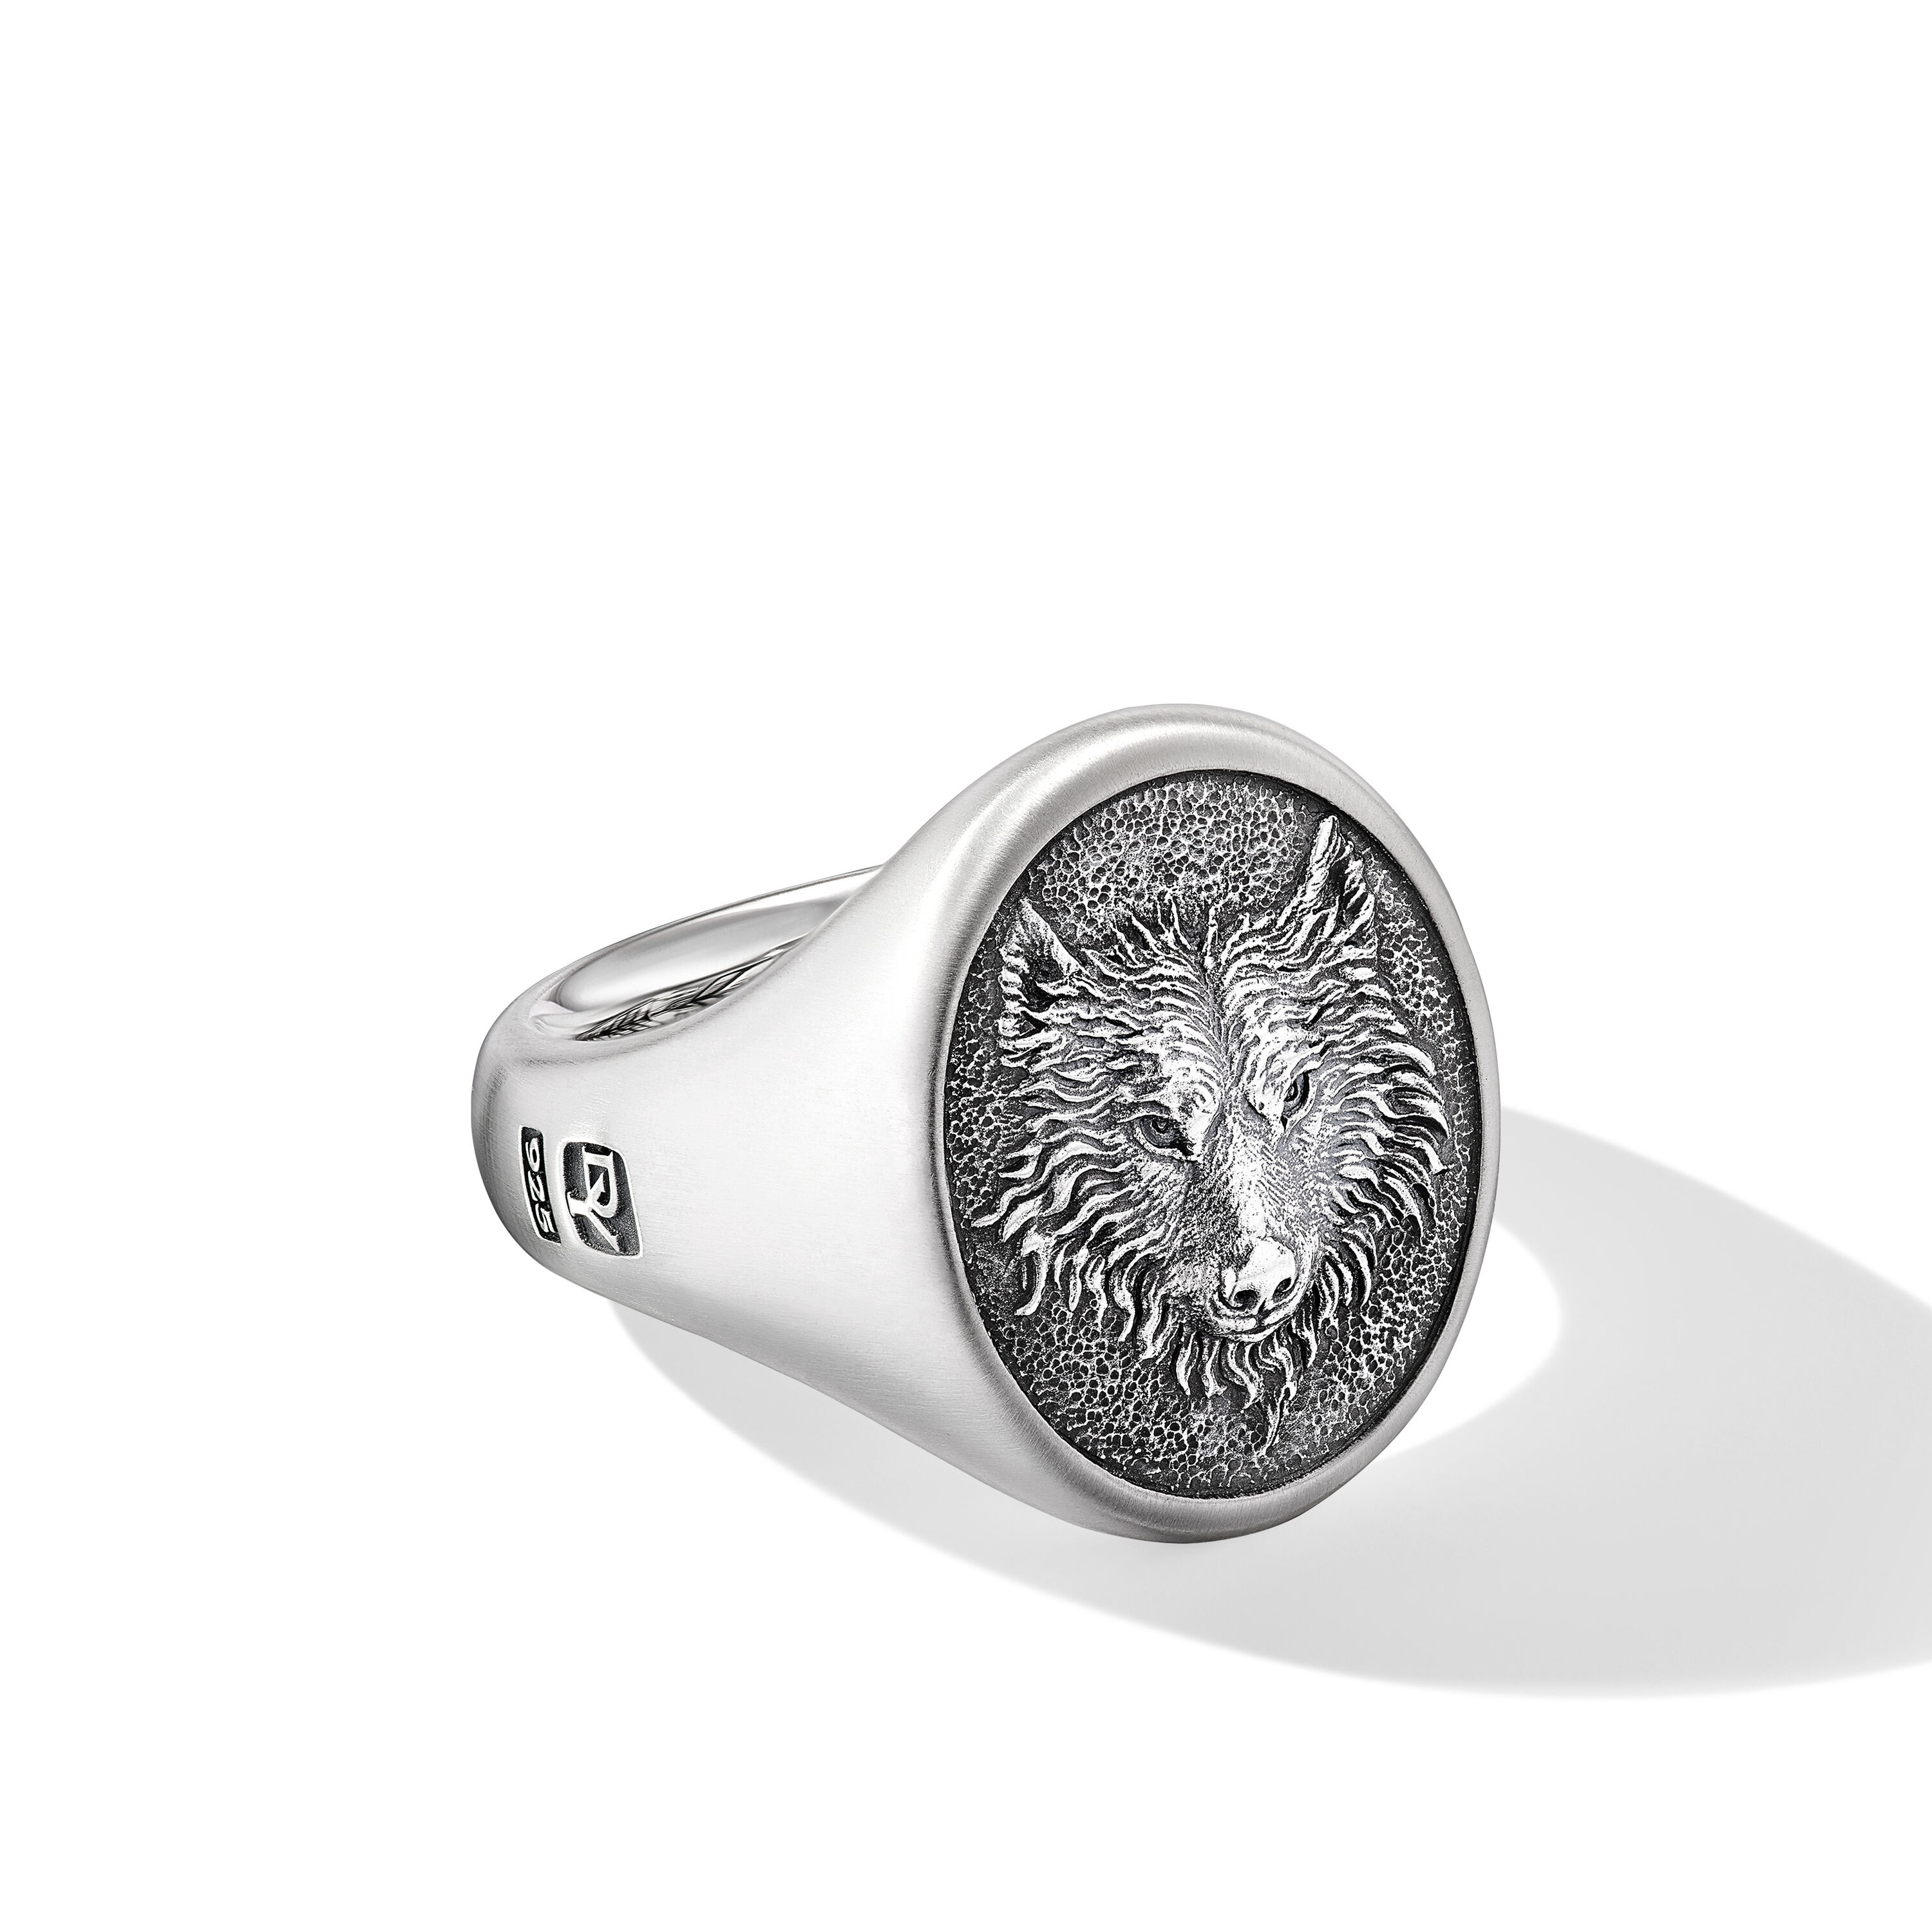 Petrvs® Wolf Signet Ring in Sterling Silver, 21.5mm